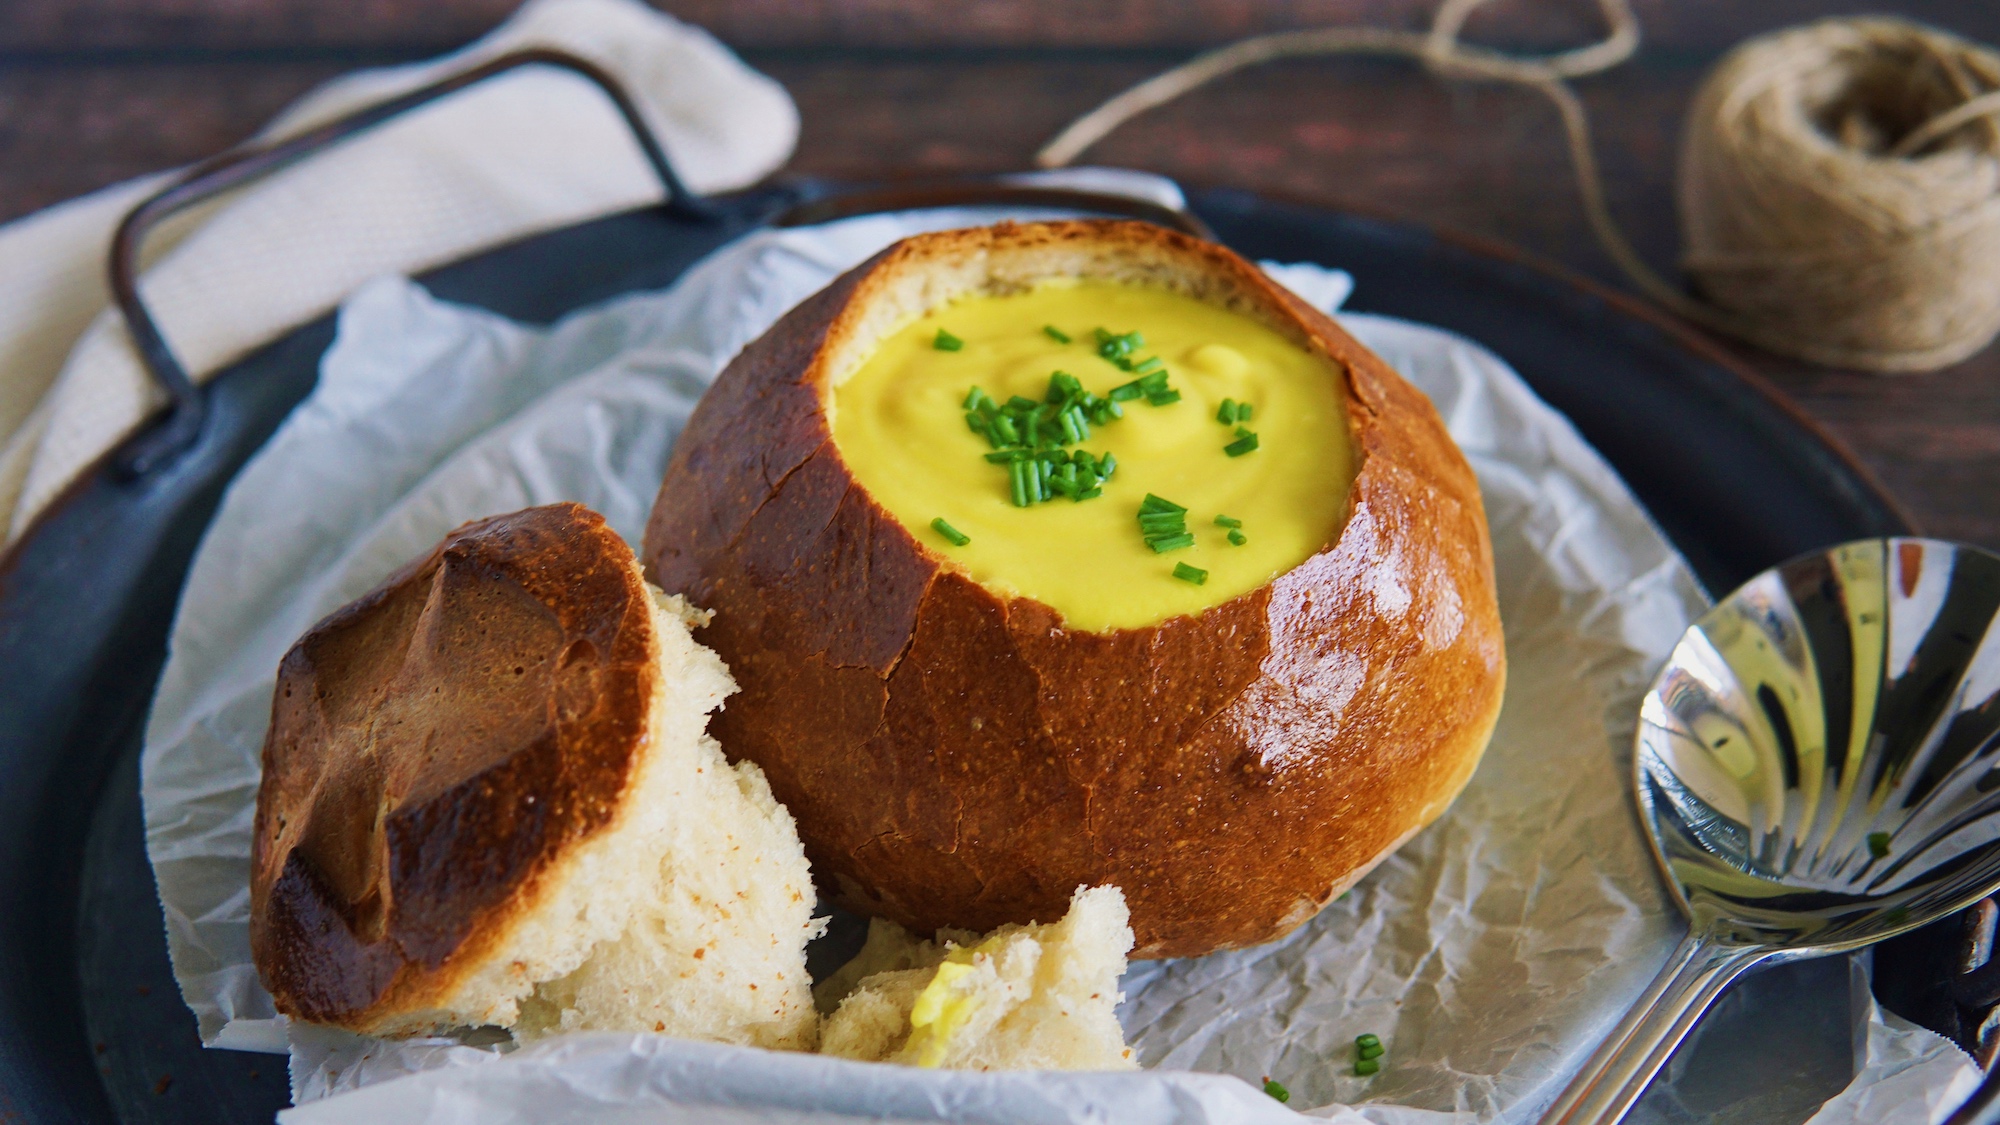 Learn How to Make Your Own Crusty Bread Bowl - The Bakeanista